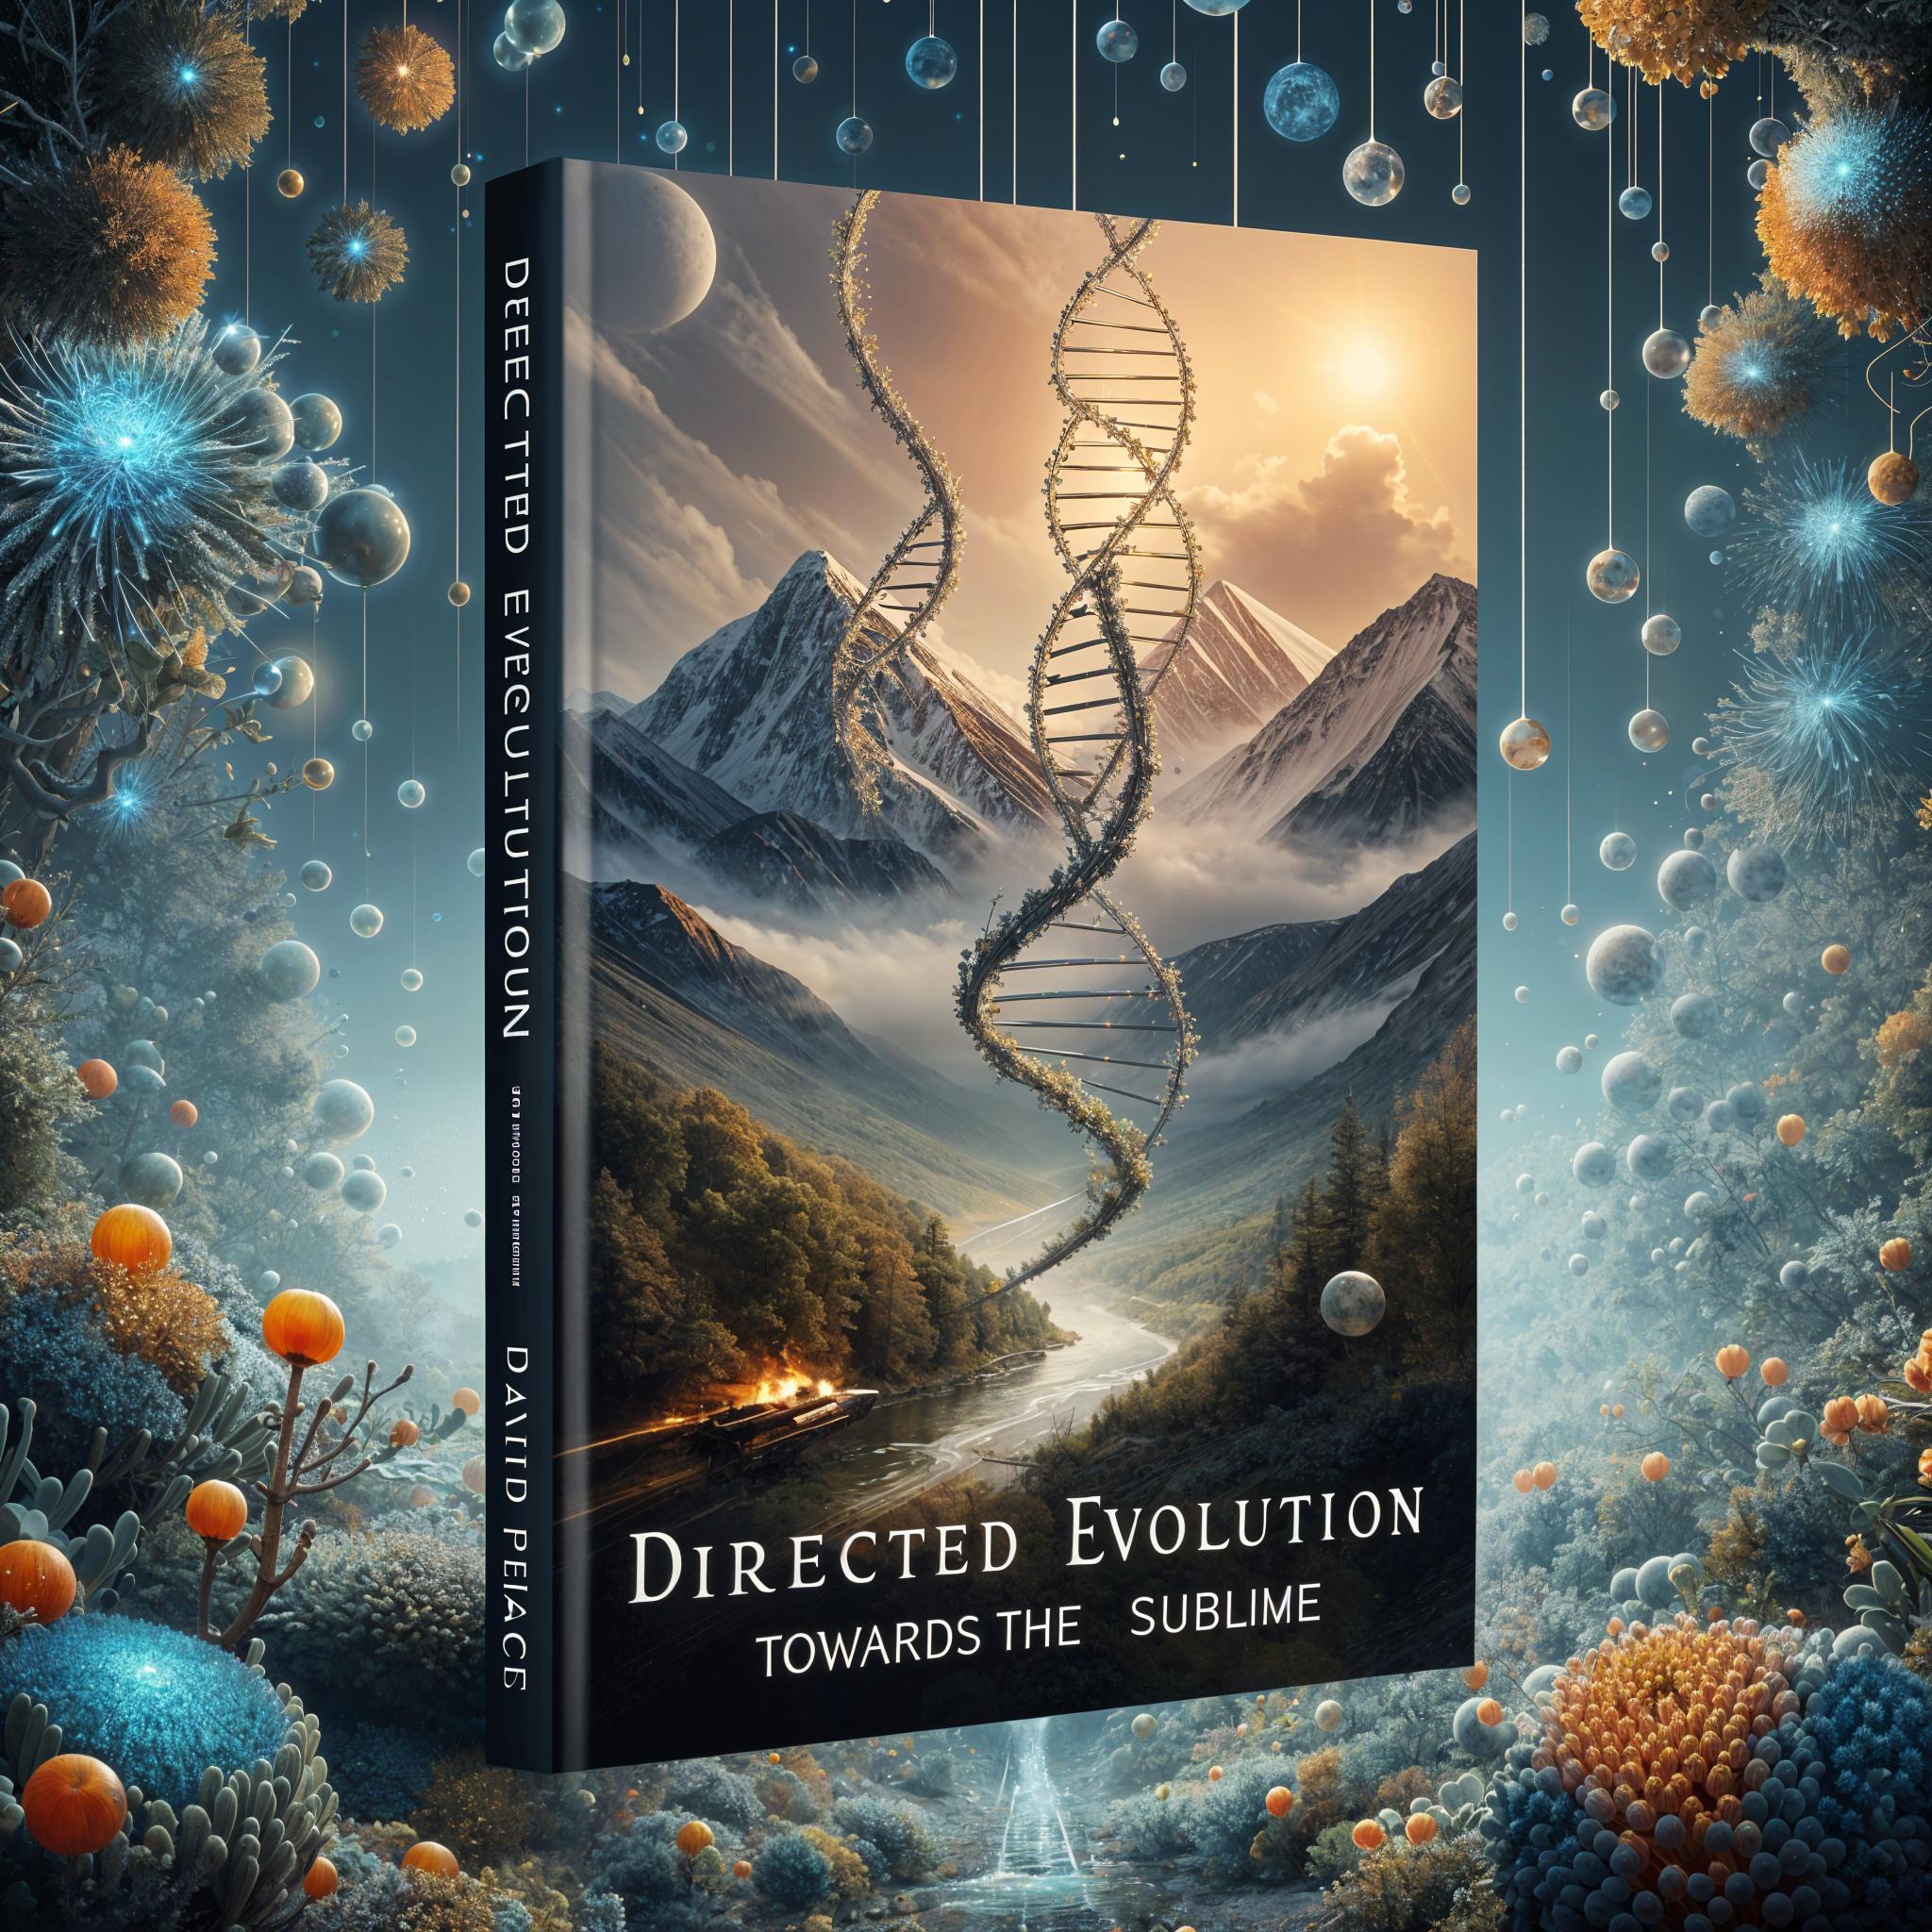 Directed Evolution: Towards the Sublime by David Pearce